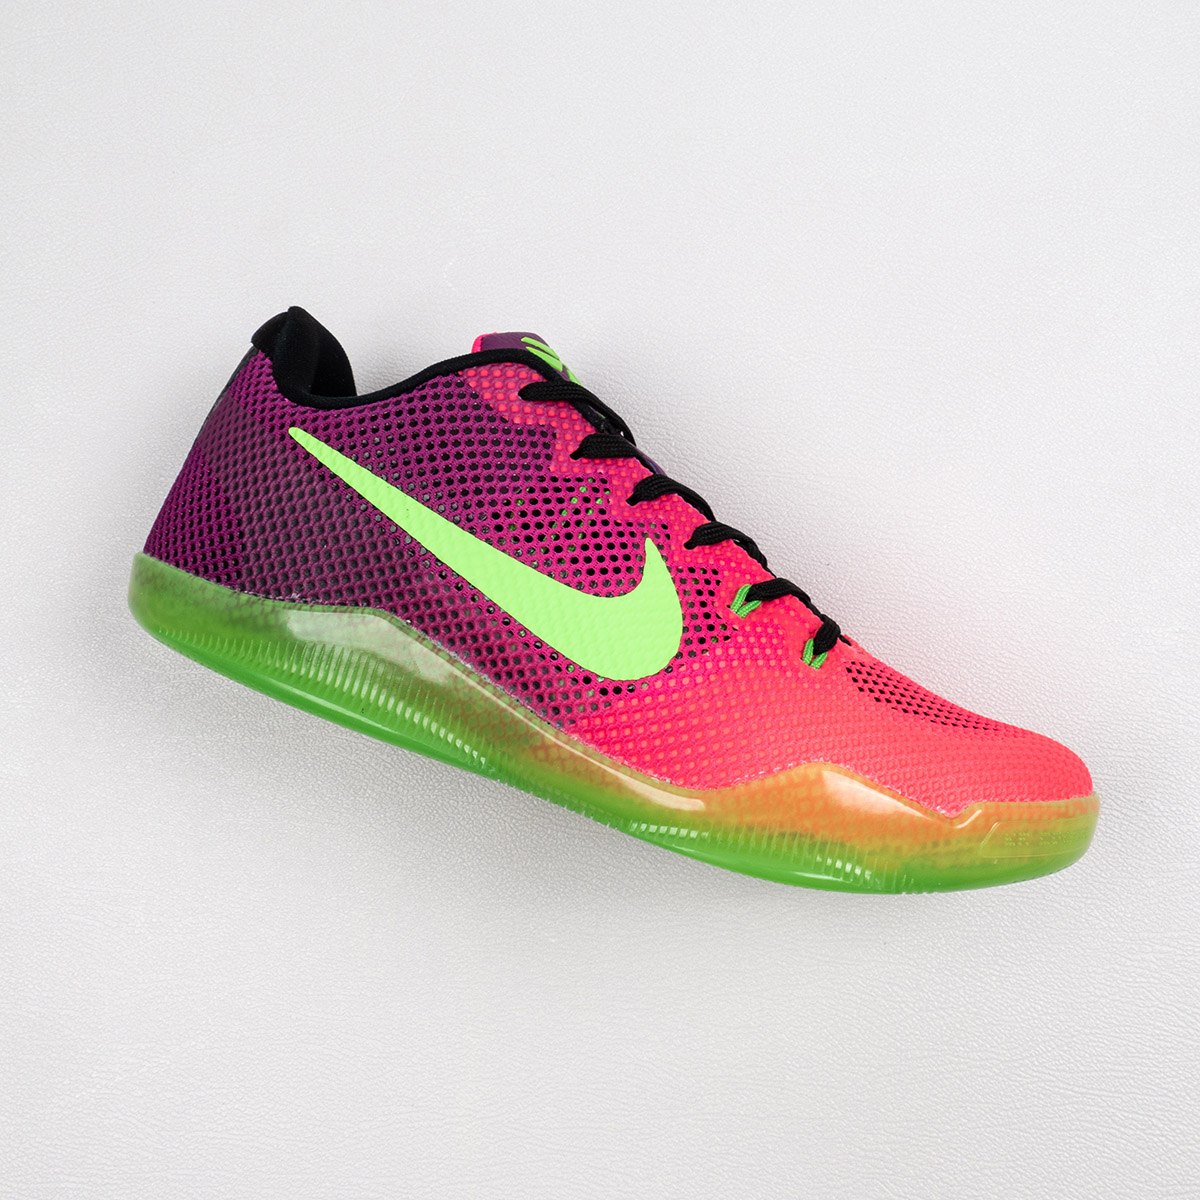 Estación de ferrocarril Que talento Nike Kobe 11 EM “Mambacurial” Pink Flash/Action Green - Red Plum – colorful nike  shoes with white pants girls meme - womens nike shox pink size 10 shoes